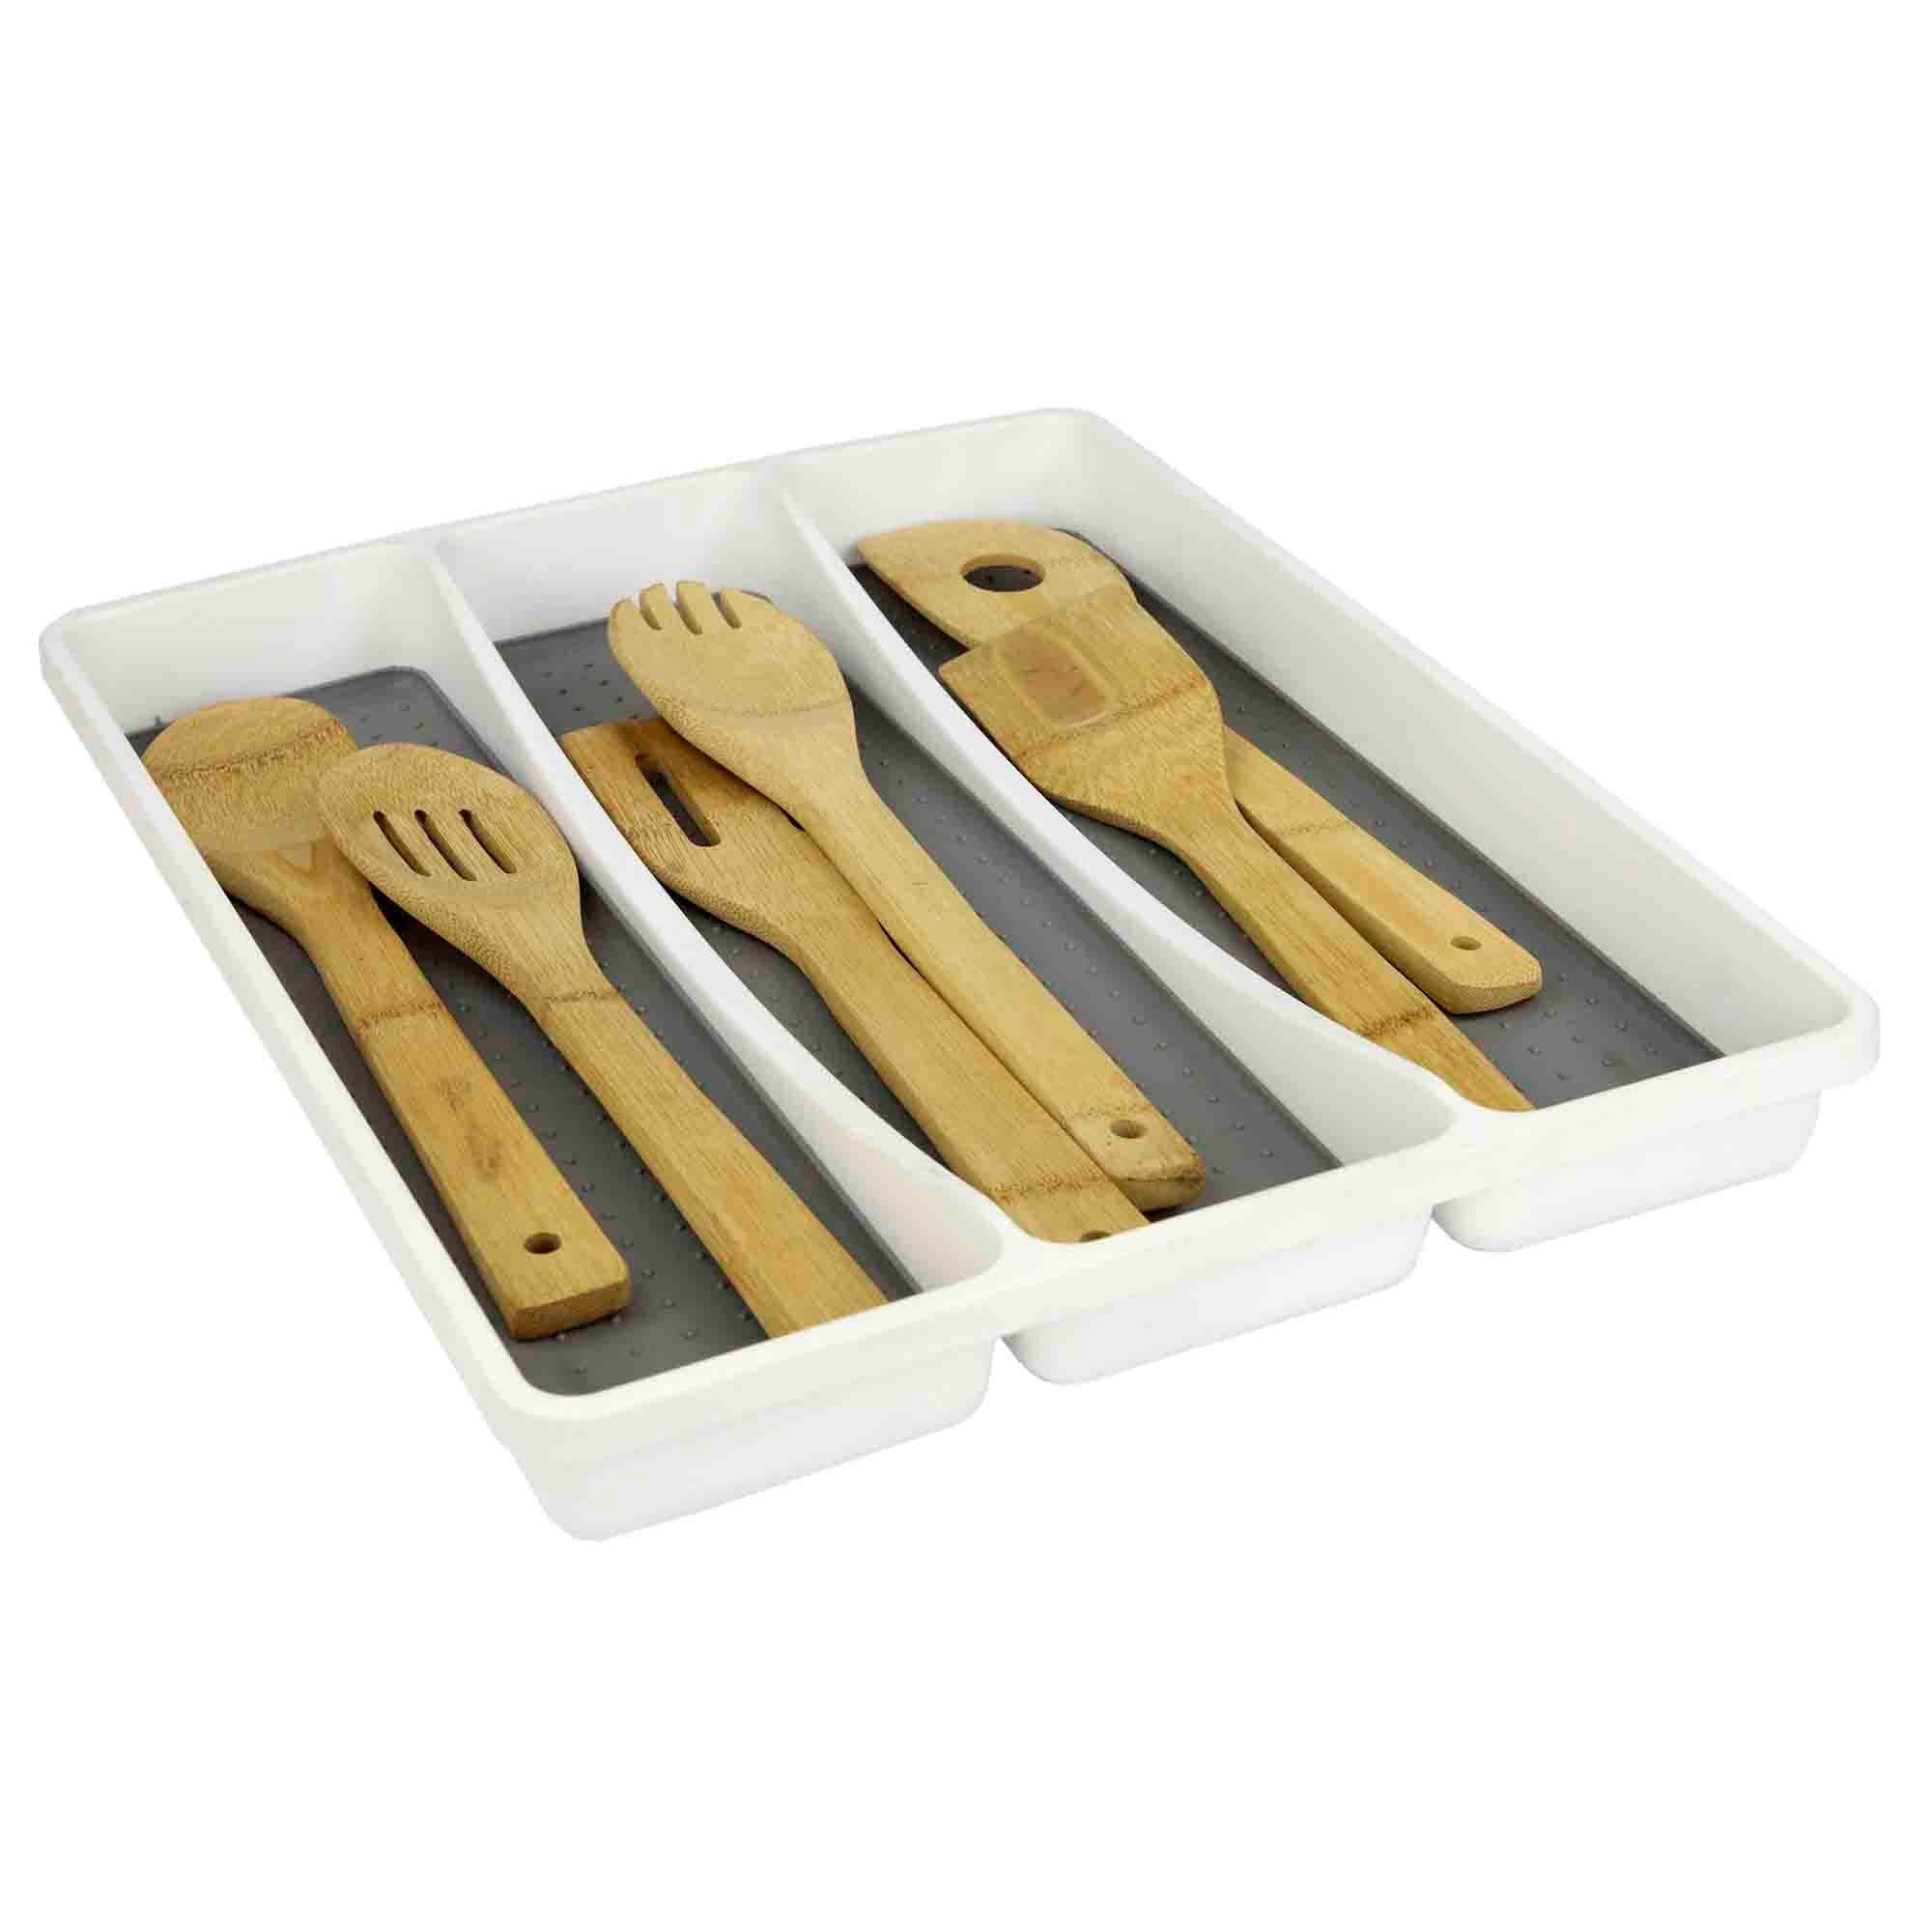 Home Basics Utensil Tray with Rubber Lined Compartments $6.50 EACH, CASE PACK OF 12